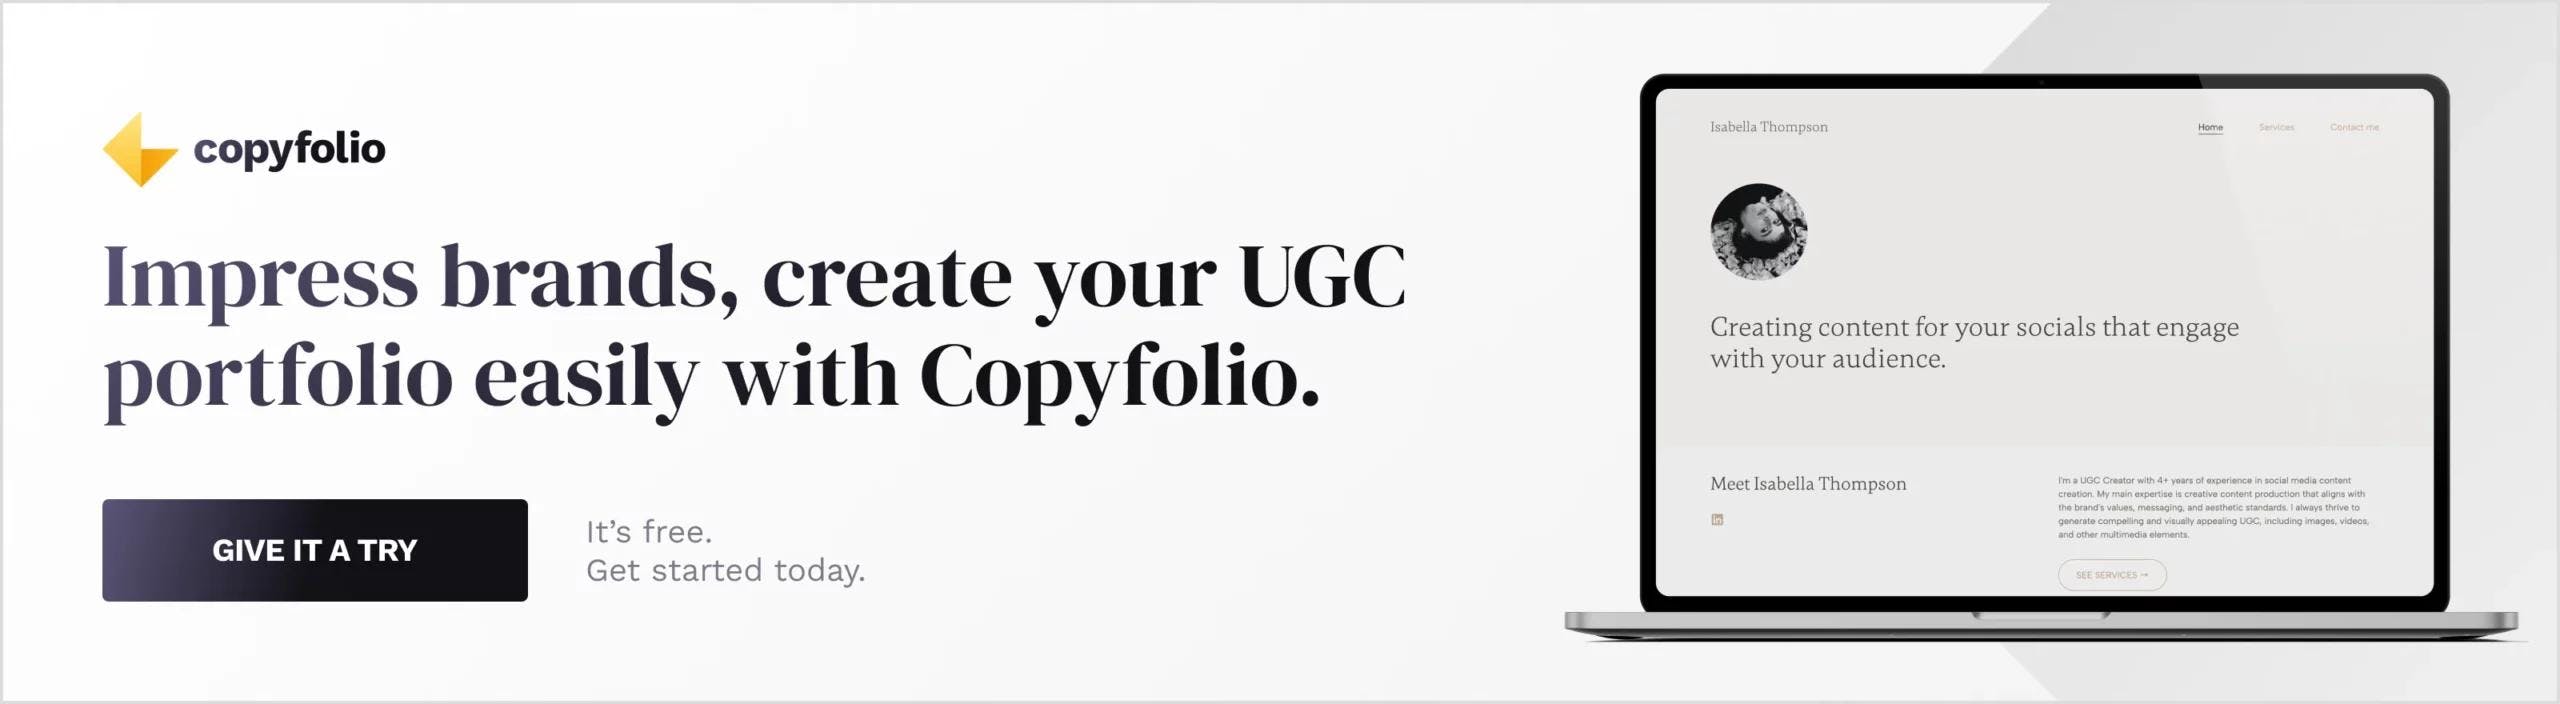 Banner saying: Impress brands, create your UGC portfolio easily with Copyfolio. Give it a try.